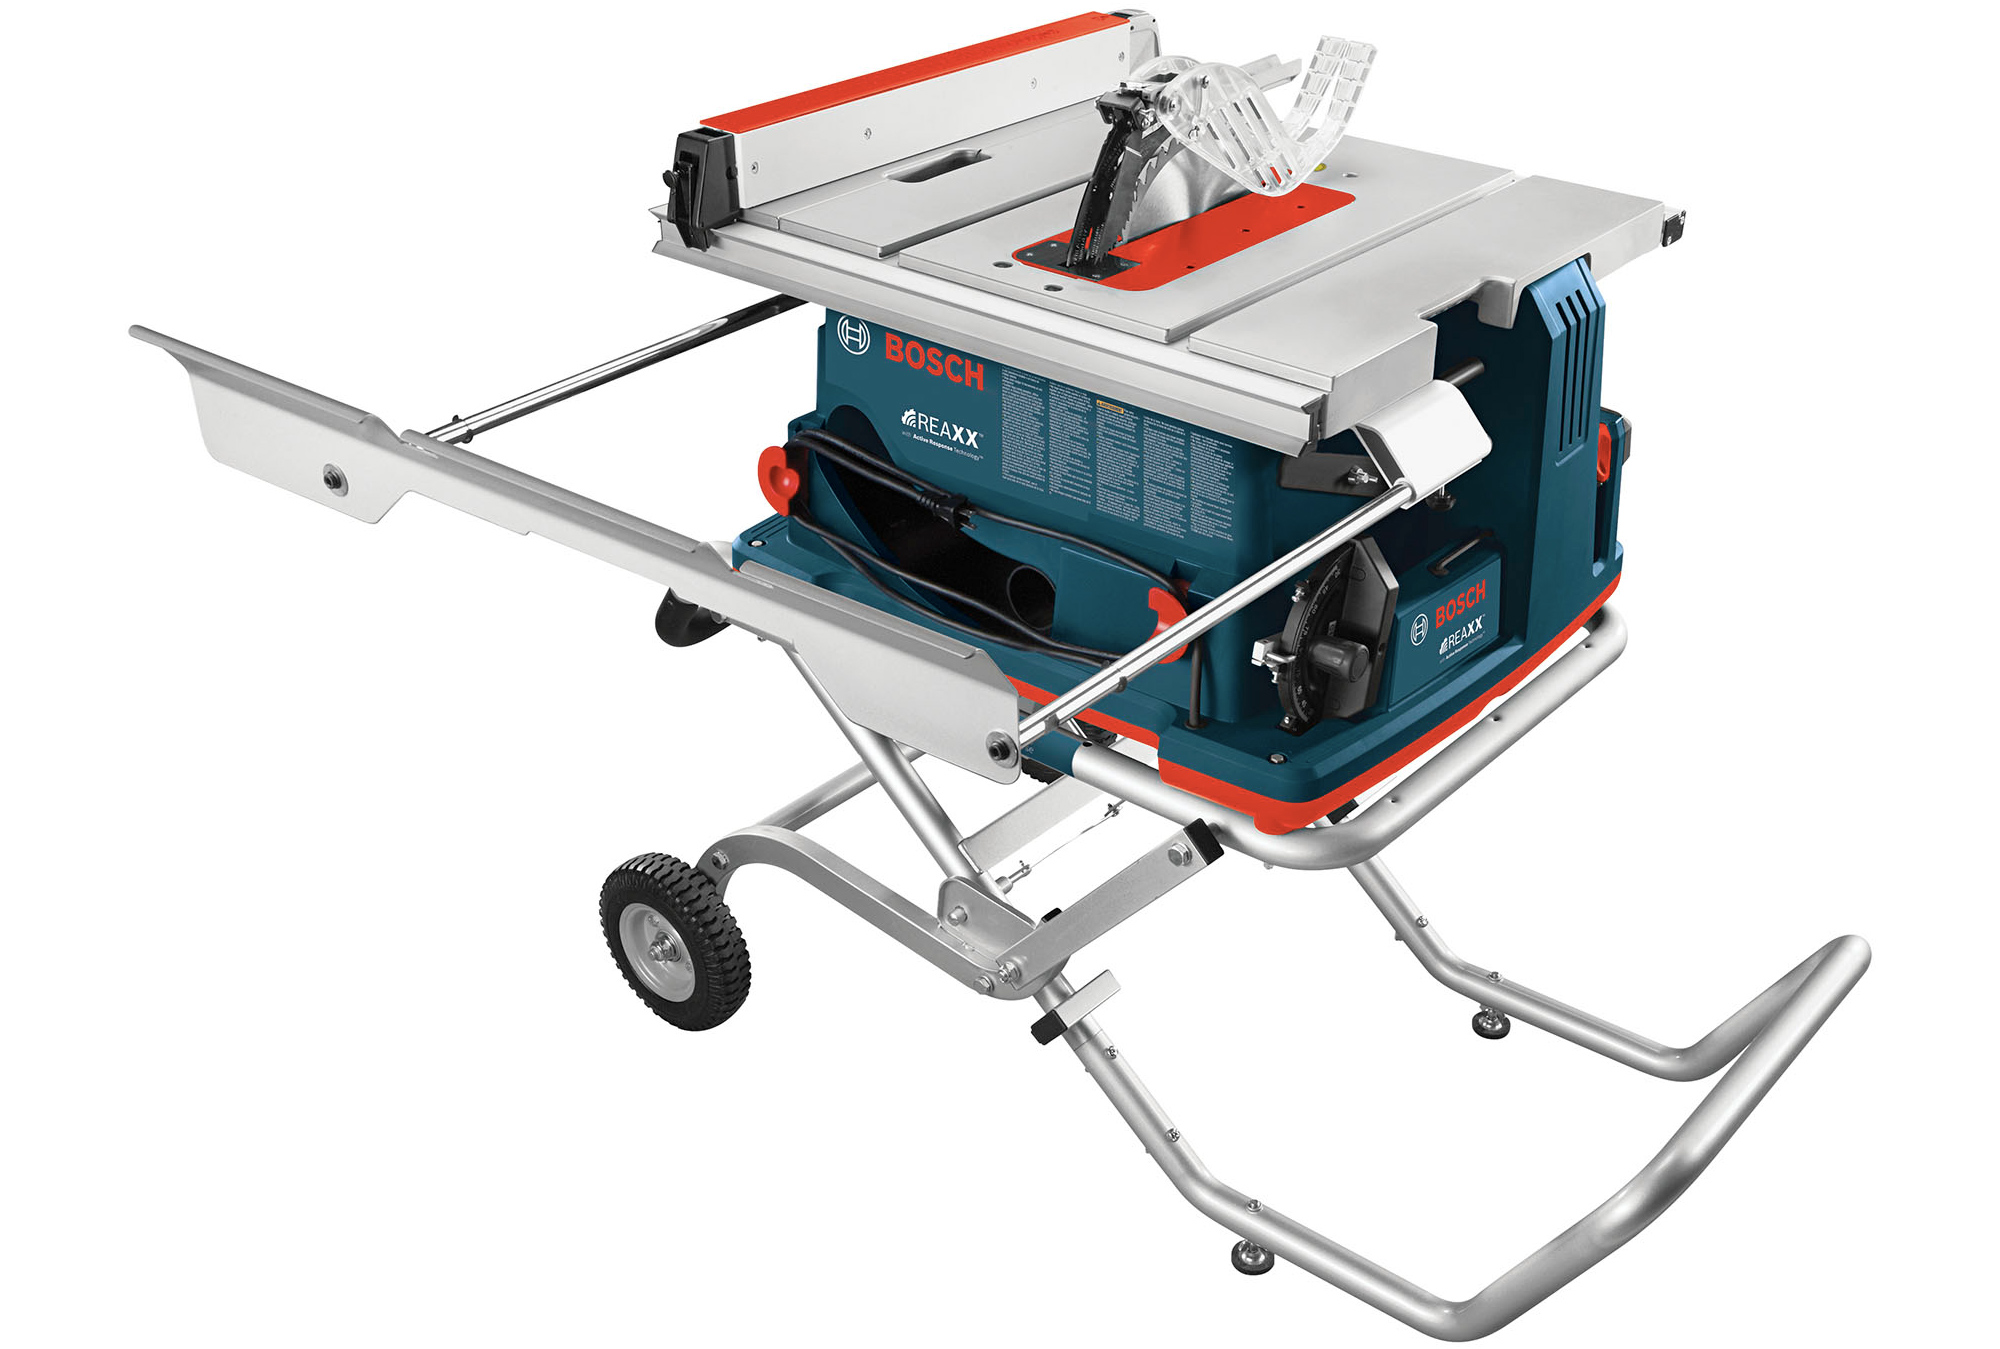 Flesh-Detecting Table Saw Instantly Drops The Blade Without Destroying It